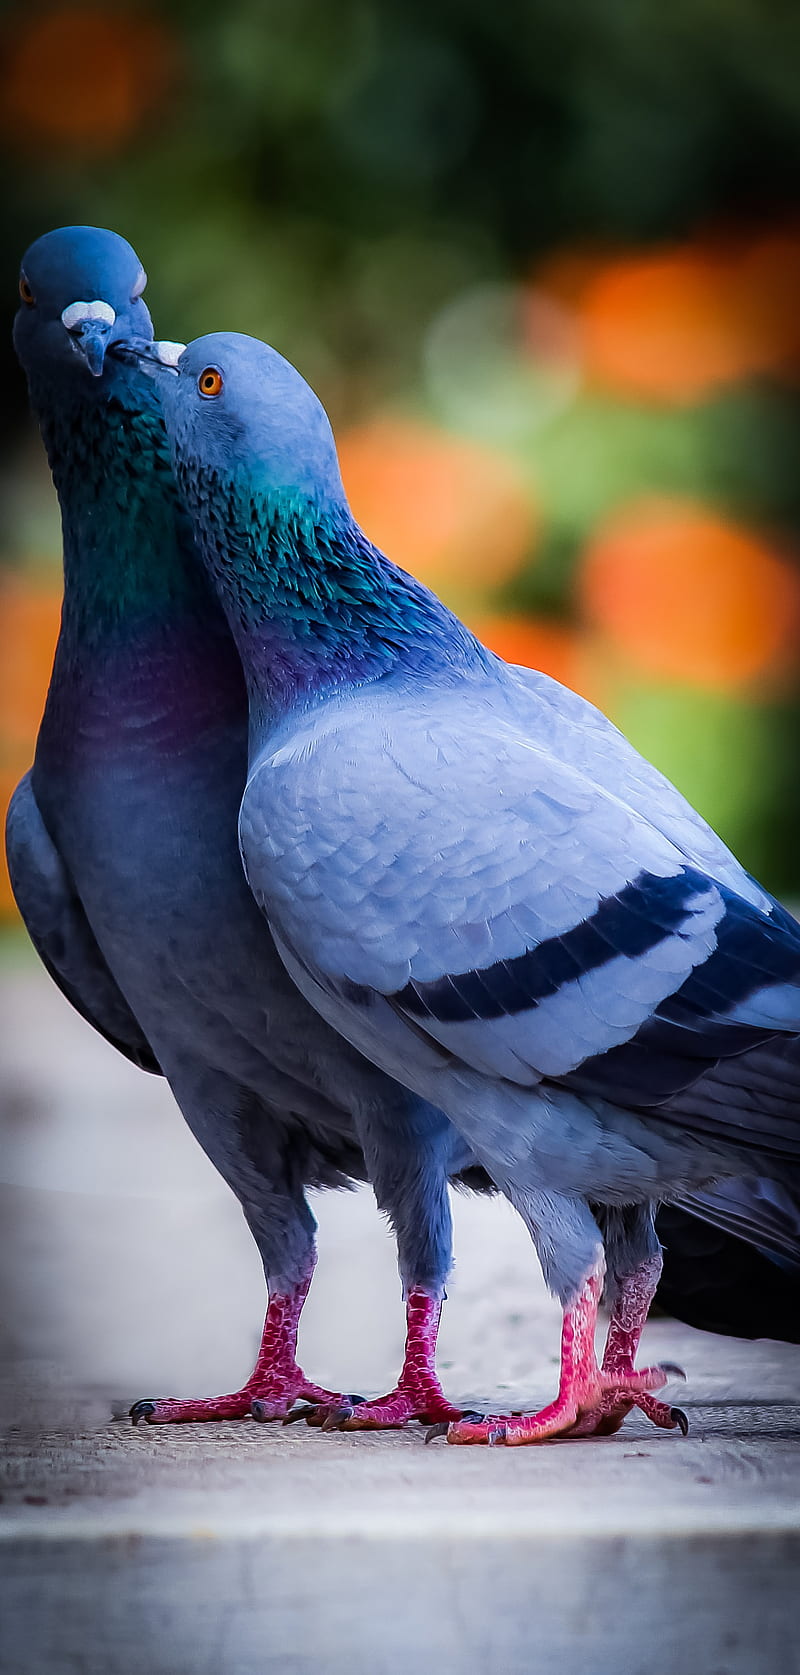 500 Pigeon Pictures  Download Free Images on Unsplash